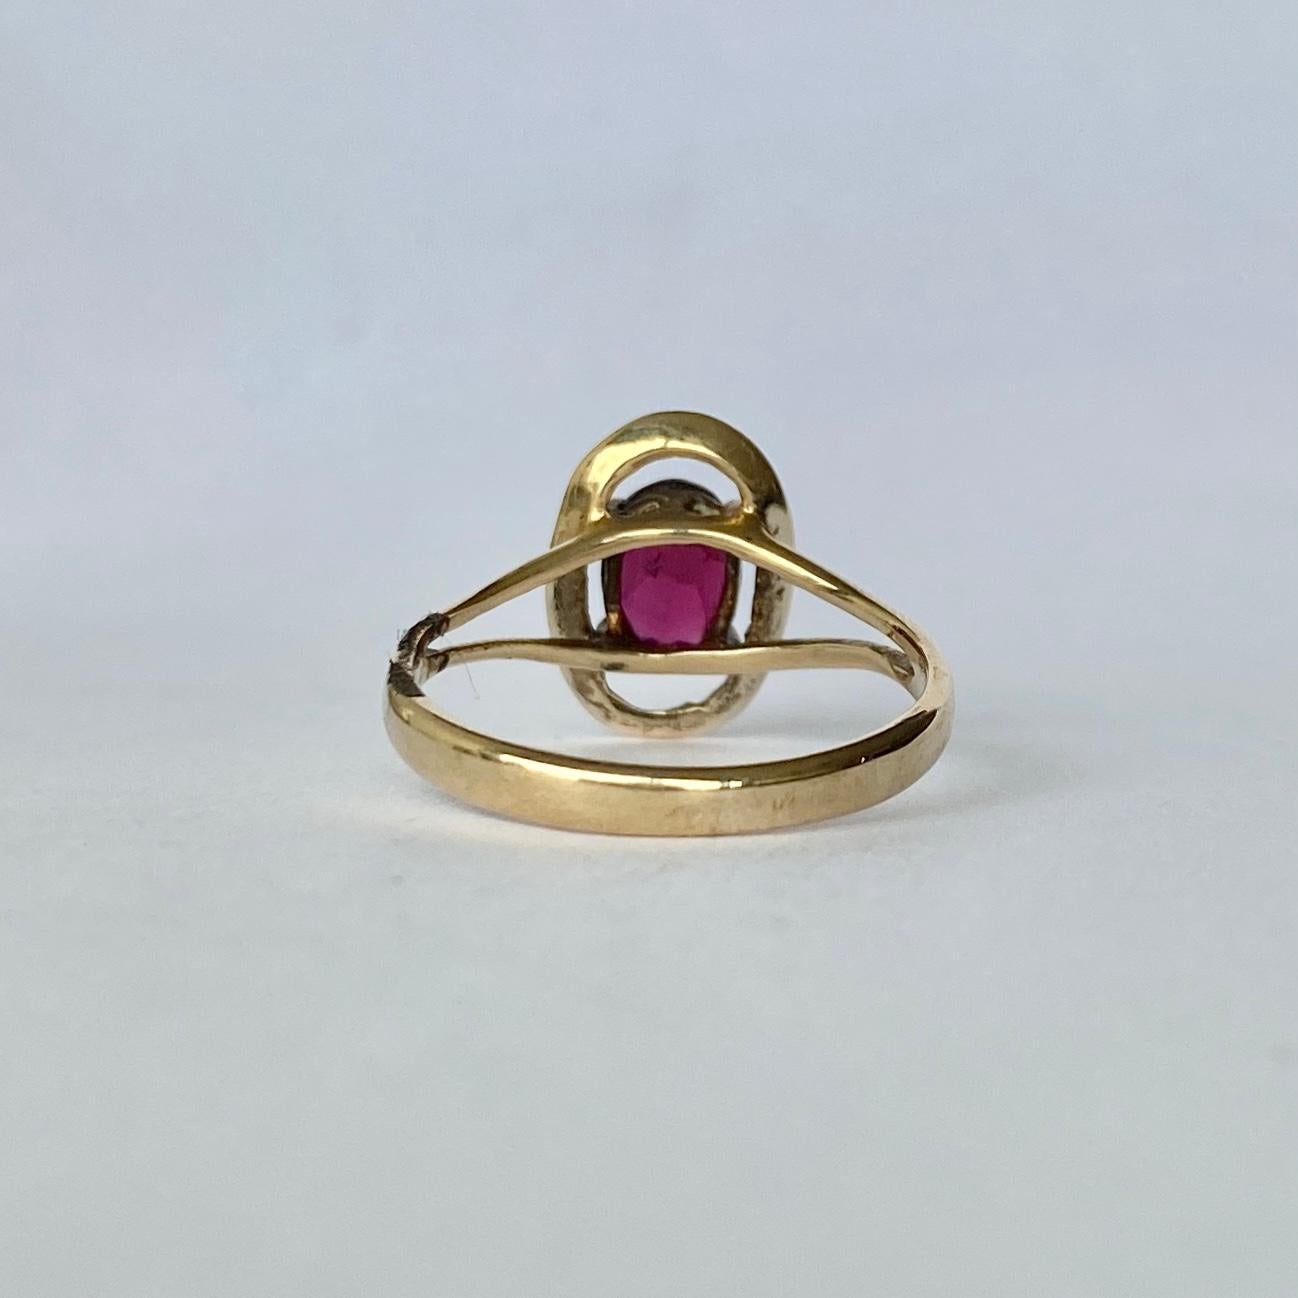 Set within this glossy 9ct gold ring is a gorgeous deep red garnet. Surrounding the stone is a frame of textured gold. Made in 1979 Birmingham, England. 

Ring Size: M or 6 1/4 
Stone Dimensions: 7.5x5.5mm 

Weight: 1.8g